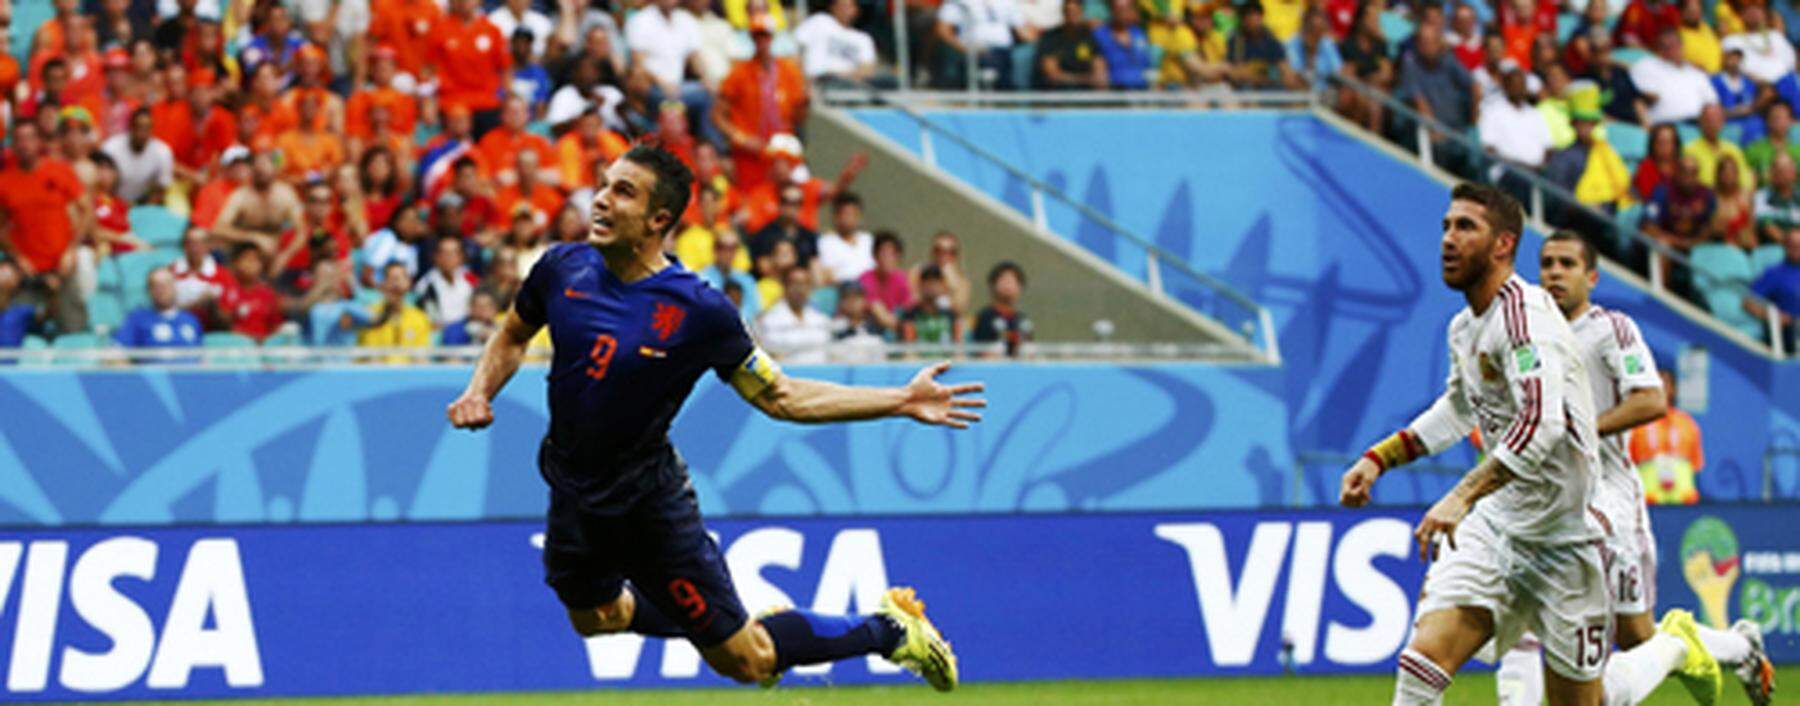 Robin van Persie of the Netherlands heads the ball to score against Spain during their 2014 World Cup Group B soccer match at the Fonte Nova arena in Salvador